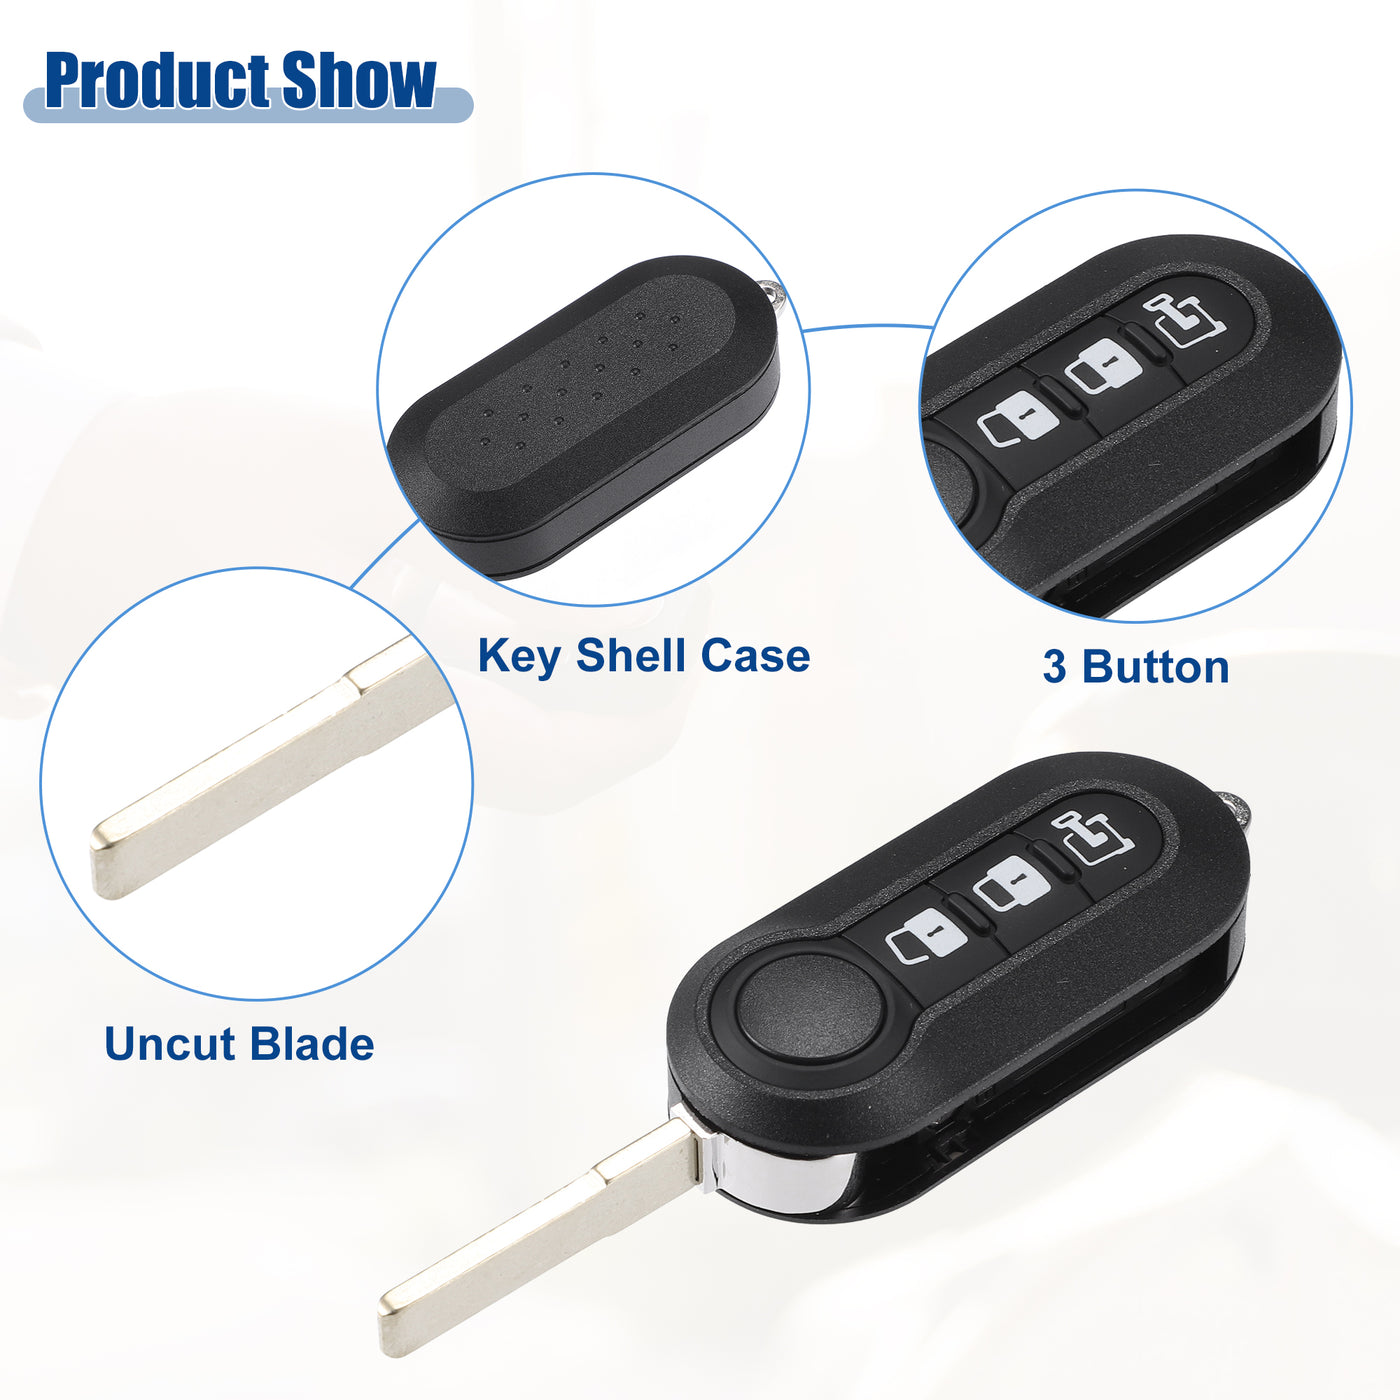 ACROPIX 433 MHz Key Fob Keyless Entry Remote Fit for Ram ProMaster 1500 2500 3500 for Fiat RX2TRF198 - Pack of 1 Black